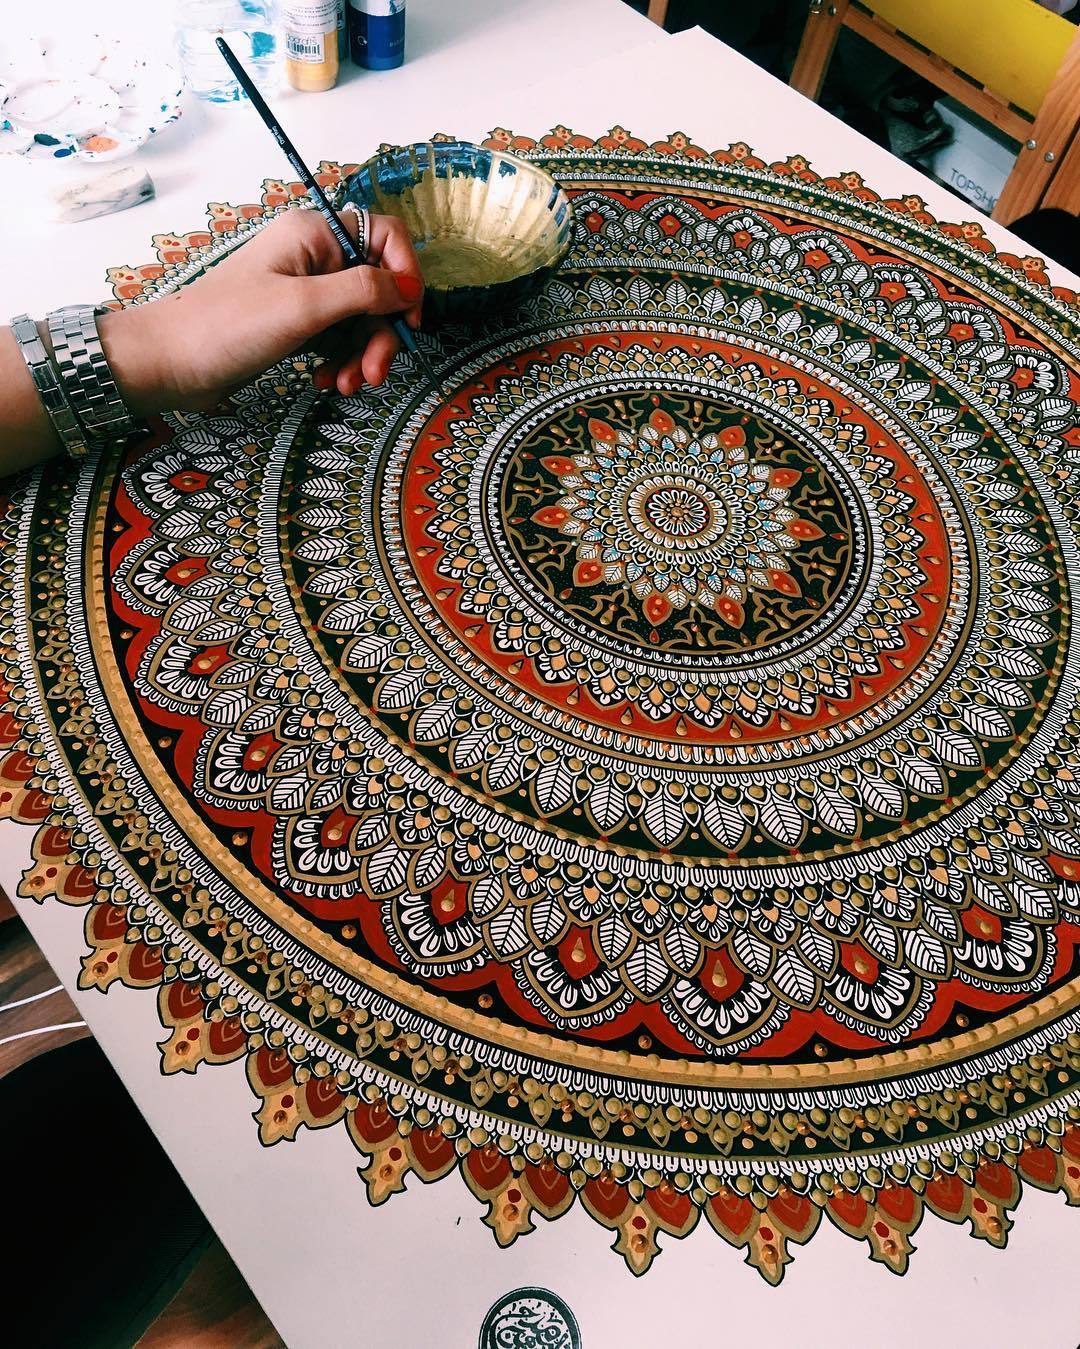 - thedesigndome: New Ornate Mandala Designs by...